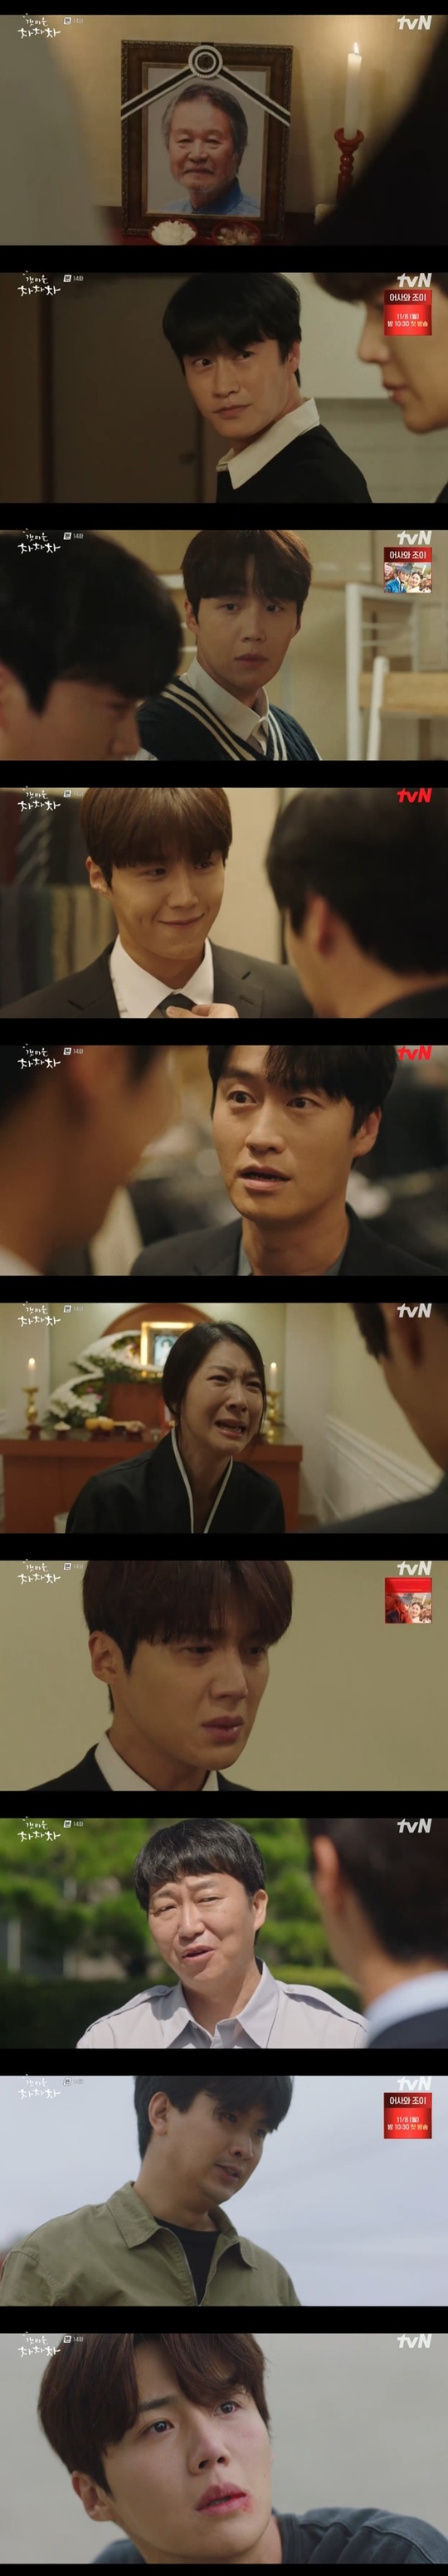 The more Kim Seon-hos past history was revealed, the more it became a mess.In the 14th episode of TVNs Saturday drama Hometown Cha-Cha-Cha (playplayplay by Shin Ha-eun/directed Yoo Jae-won), which aired on October 10, Hong Doo-sik (played by Kim Seon-ho) recalled his past history with college senior Park Woo (played by Oh Ui-sik).Yoon Hye-jin (Shin Min-ah) said, Lets take time when Hong Doo-sik did not tell us about the five-year gap before returning to the resonance, and Ji Sung-hyun (Lee Sang-hyun) said, Love is not a poker game that hides and bets when rumors of a fight between Yoon Hye-jin and Hong Doo-sik.Hell show you straight and judge you. Hell look at you as you are. Hes like that.With him, Hong Doo-sik has reverted one by one the history of his past with Park Woo.When he was a college student, Park Woo shared Hong Doo-siks grandfathers sacrifice, saying, Grandfather, Im called Jung Woo.Doshik will be in charge of the army and send it to the house. Please watch it from the sky. Then Park Woo said, When Hong Doo-sik became The Internet, you passed our company The Internet, but you can not do this.When I get my first full-time salary, I want a good fishing rod, and thats all right. Park also had Ji Sung-hyuns cousin (Kim Ji-hyun) by her side.Hong Doo-sik said, Yes, I will live, I will be converted to full-time employment.But the next memory was Park Woos funeral home, and Park Woos wife was angry at Hong Doo-sik, saying, Where are you going to be? How dare you come here?Hong Doo-sik said, Im sorry for your sister. Park Woos wife said, Sorry? If youre sorry, save Jung Woo.Why would our Jung Woo die, without any fault! You should have died! You should have died instead!In the meantime, Yoon Hye-jin received a scout proposal for a professor in Seoul in a situation where he was determined to wait for Hong Doo-sik, and Hong Doo-sik told Yoon Hye-jin, I have something to say today.Its going to be a long story, will you listen to it?But to Hong Doo-sik, Kim Do-ha (Lee Seok-hyung) said, Mr. Handy, is Mr. Hongs name Hong Doo-sik? Did you work for YK Asset Management before? Do you know Kim Ki-hoon?My father? Im a father, he said, and made another crisis. His father, who had not been able to use his lower body, was a guard who worked for Hongdu-sik in the past.Kim Do-has anger added an ominous aura to Hong Doo-siks past history.